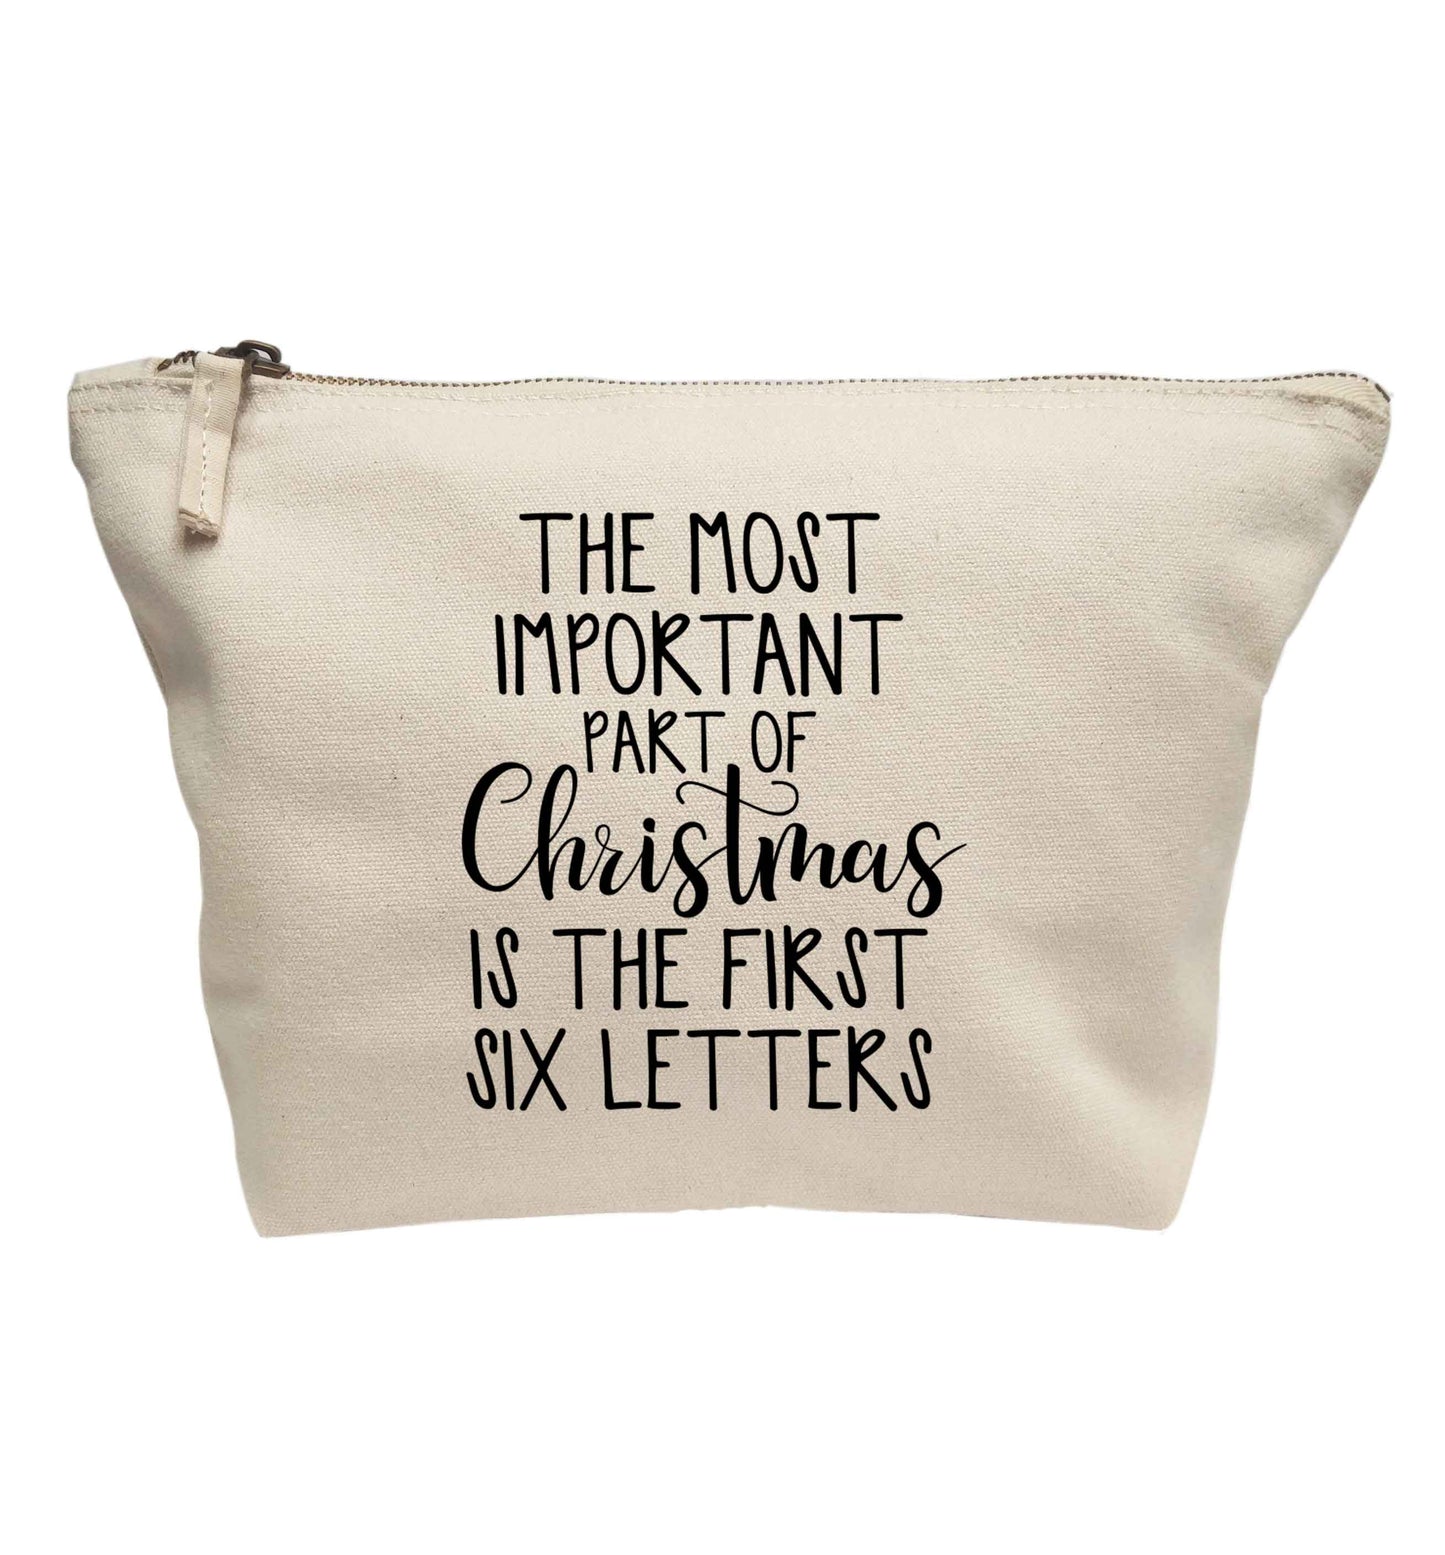 The most important thing about Christmas is the first six letters | makeup / wash bag